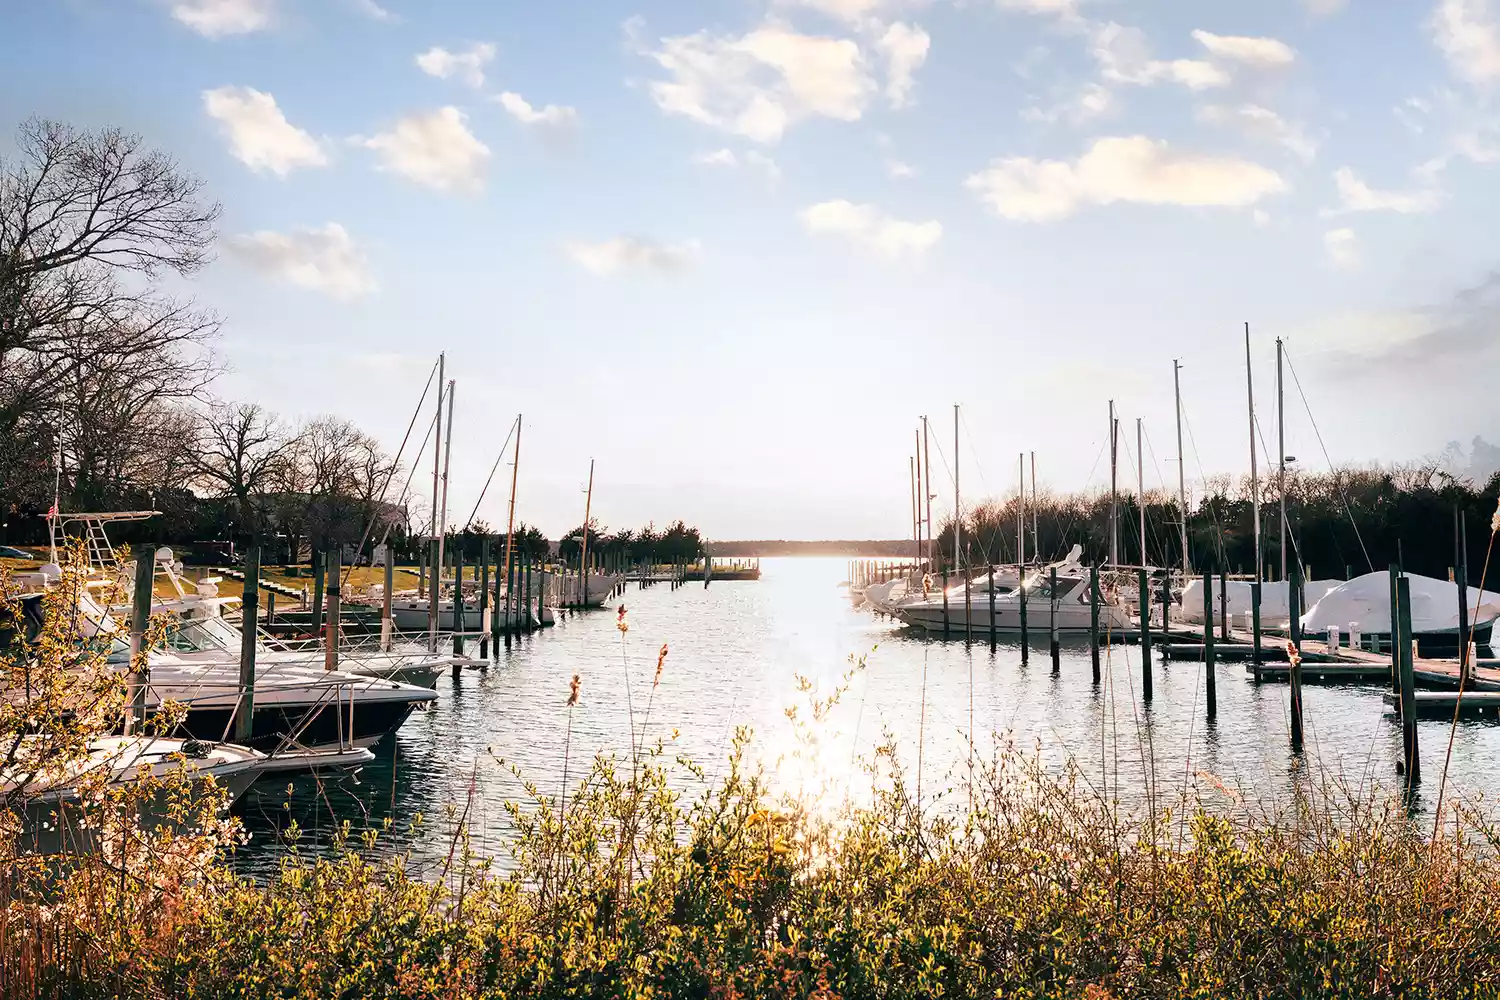 A Year-round Local's Advice on Where to Stay, Eat, Drink, and Play in the Hamptons